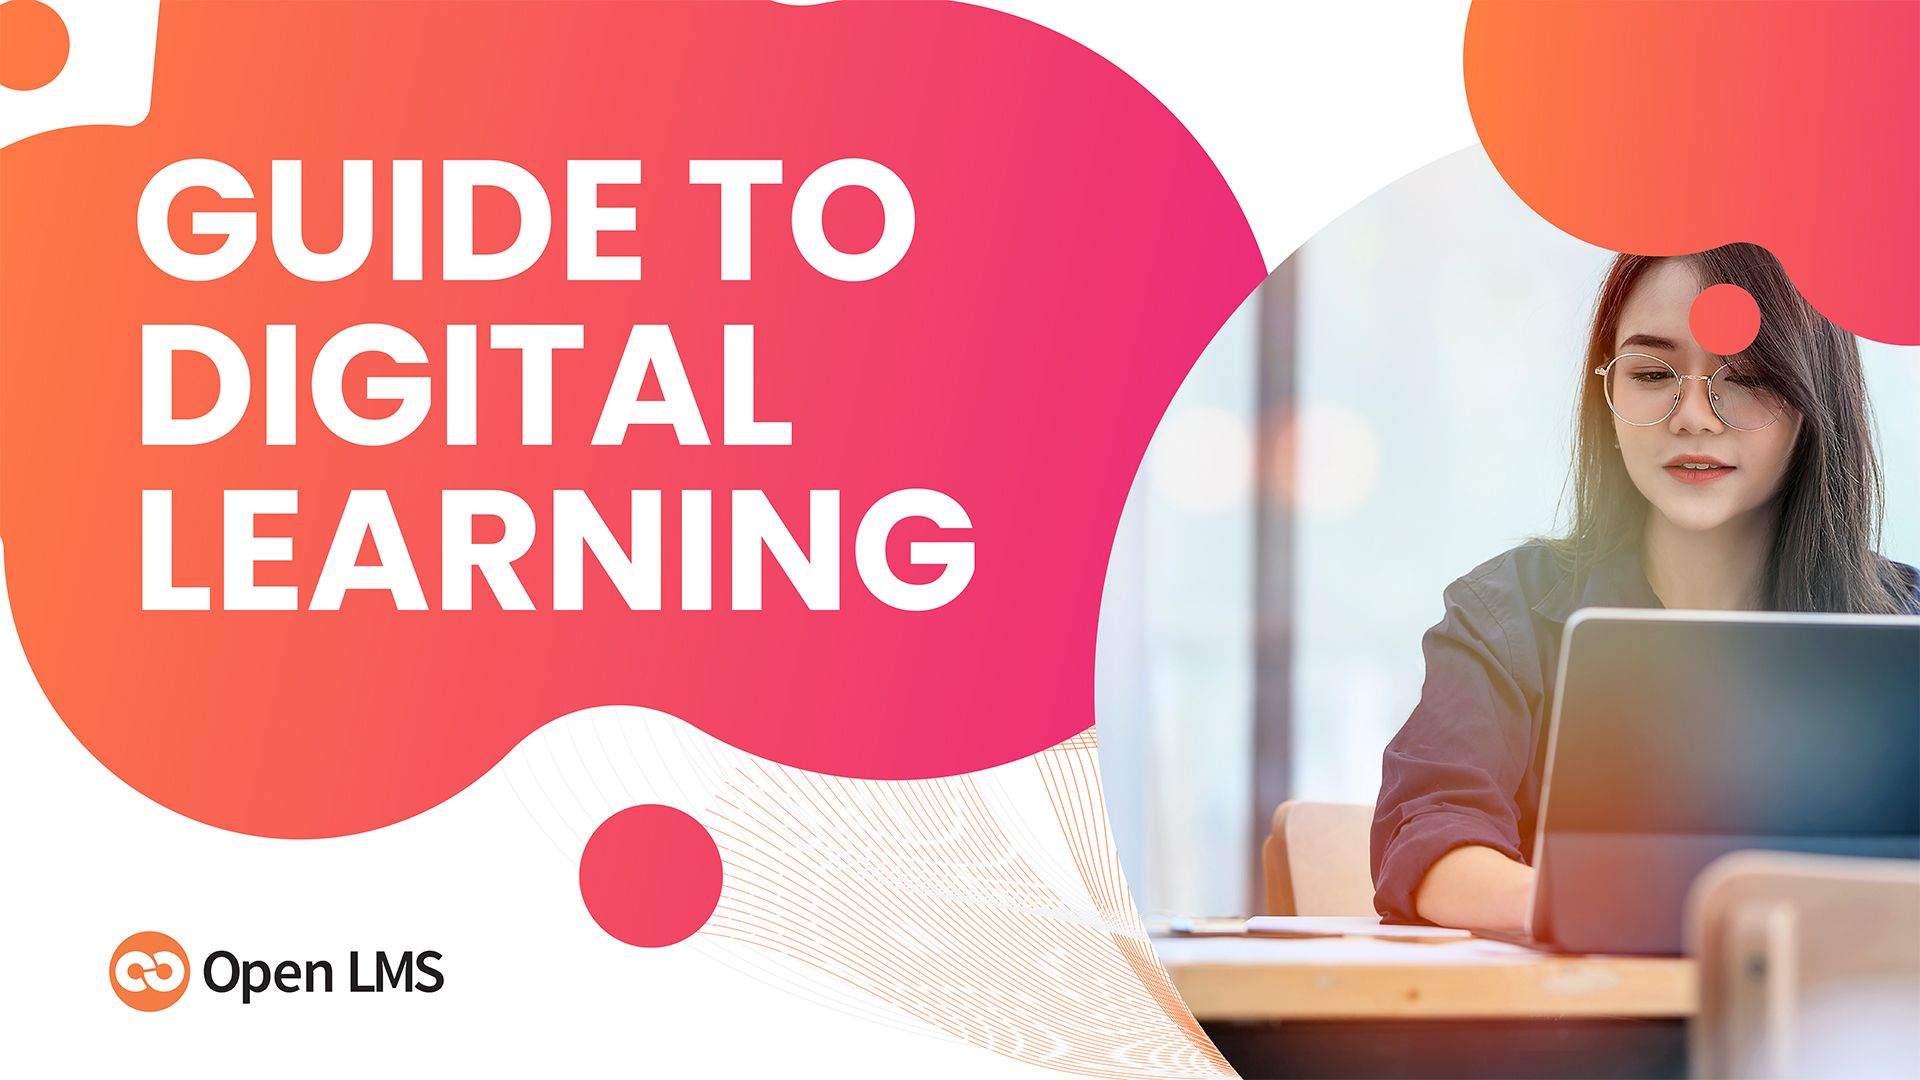 Your Complete Guide to Digital Learning